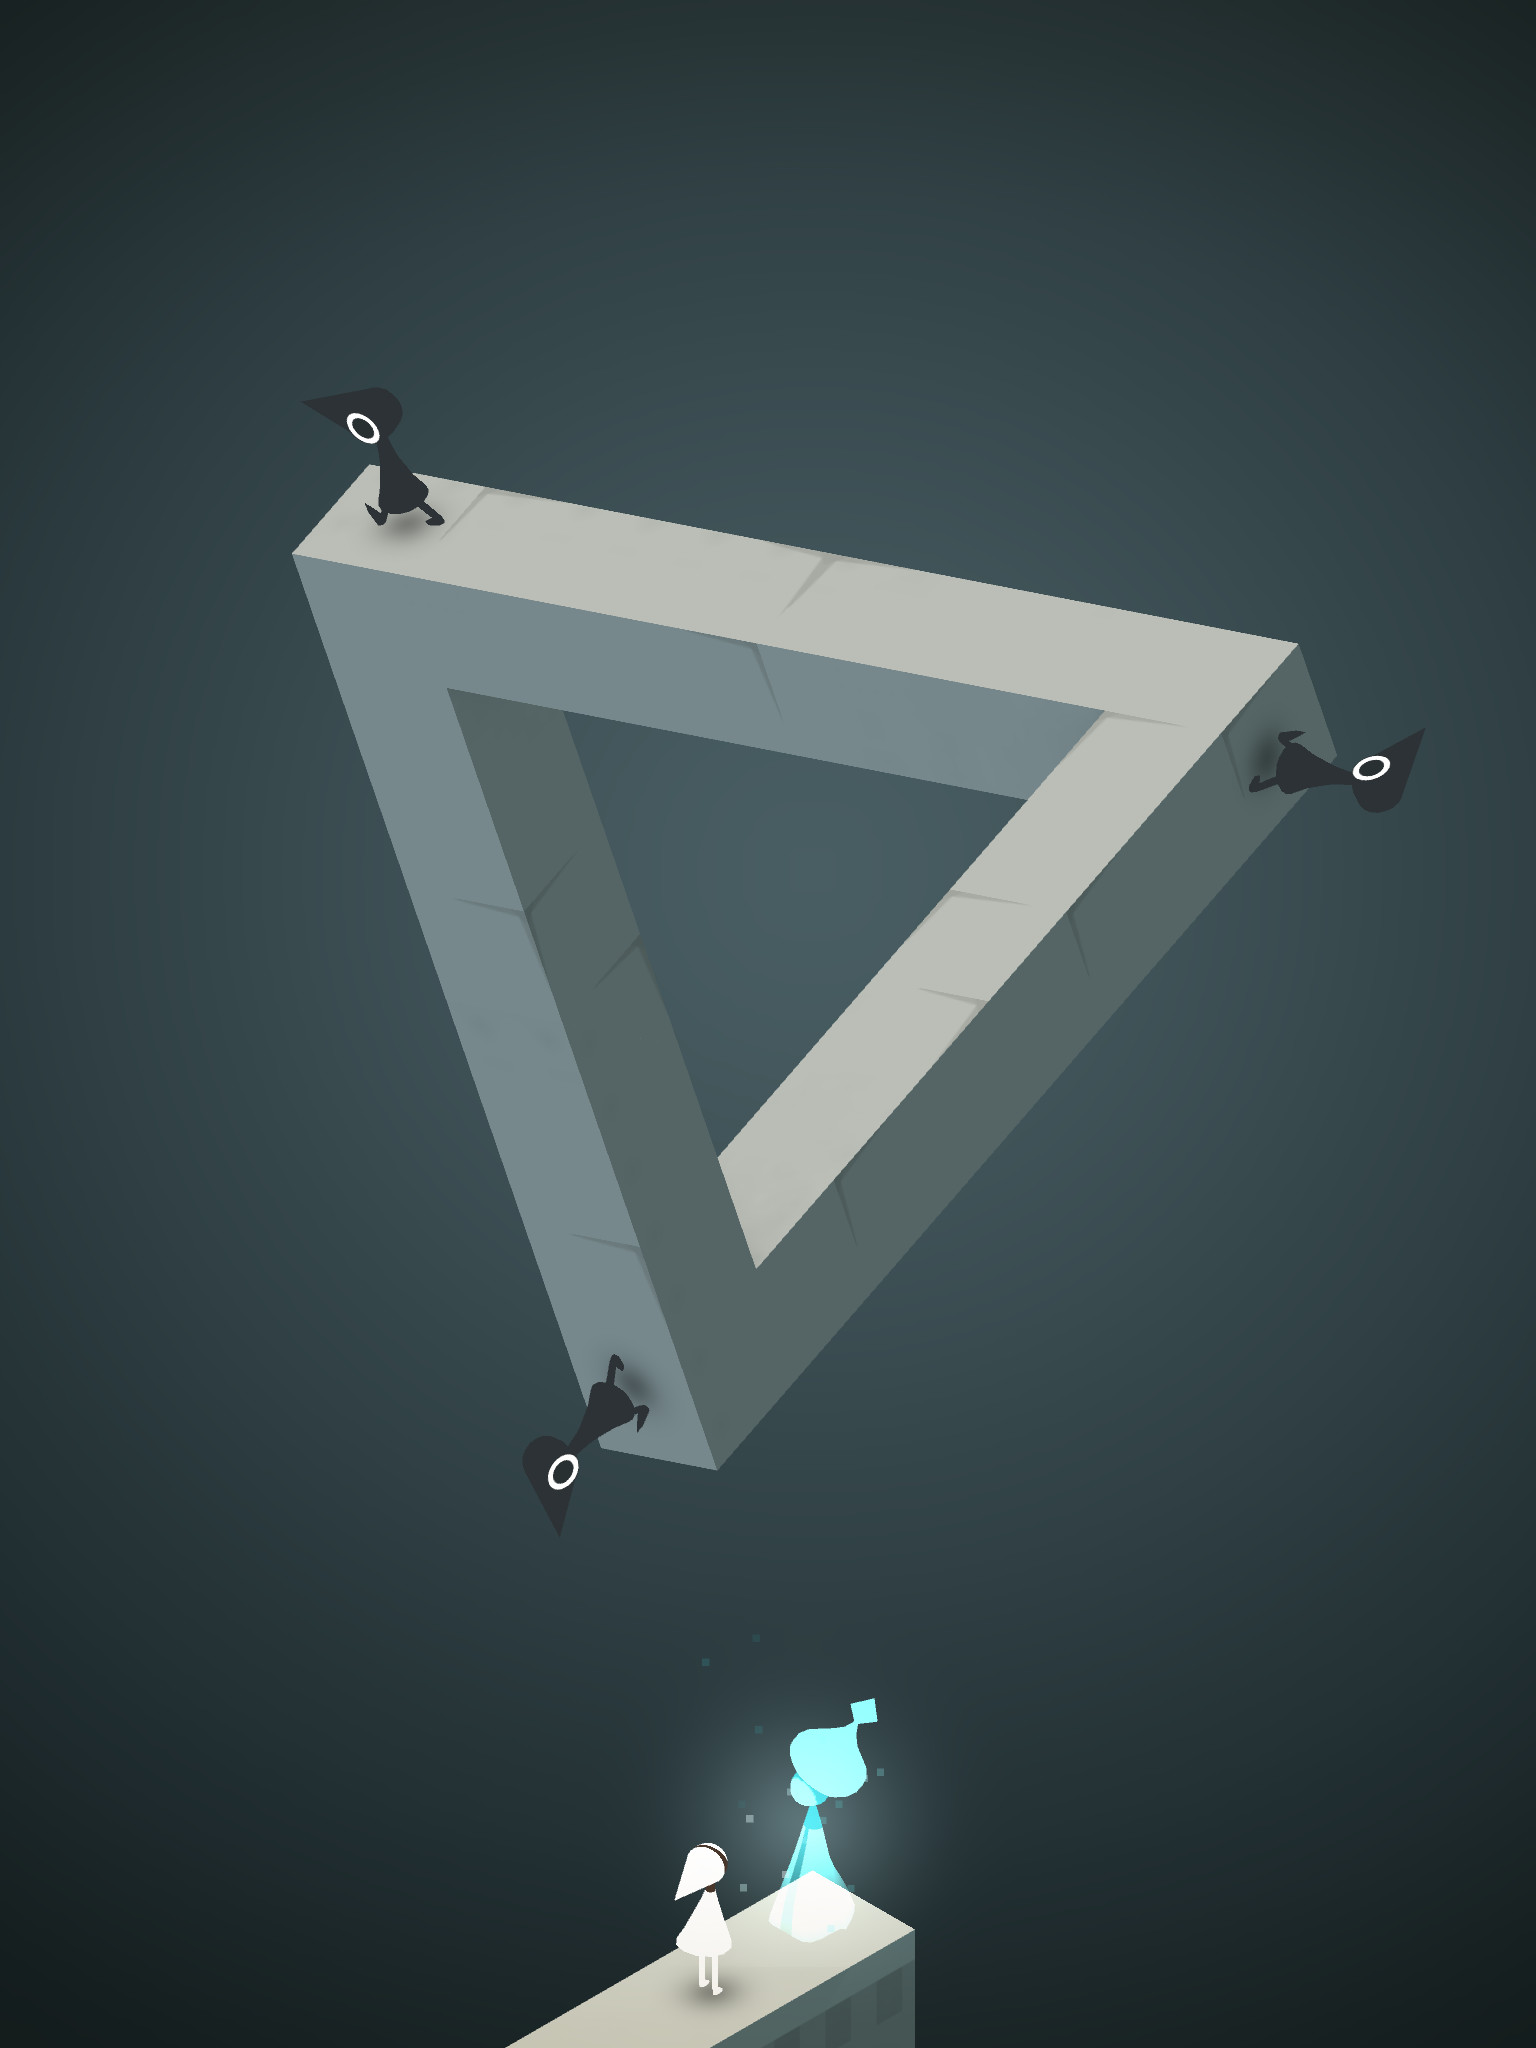 1536x2048 World in Monument Valley is based on architectural structures built using  simple geometric shapes. Is minimalist, yet charming, full of pastel colors  and ...